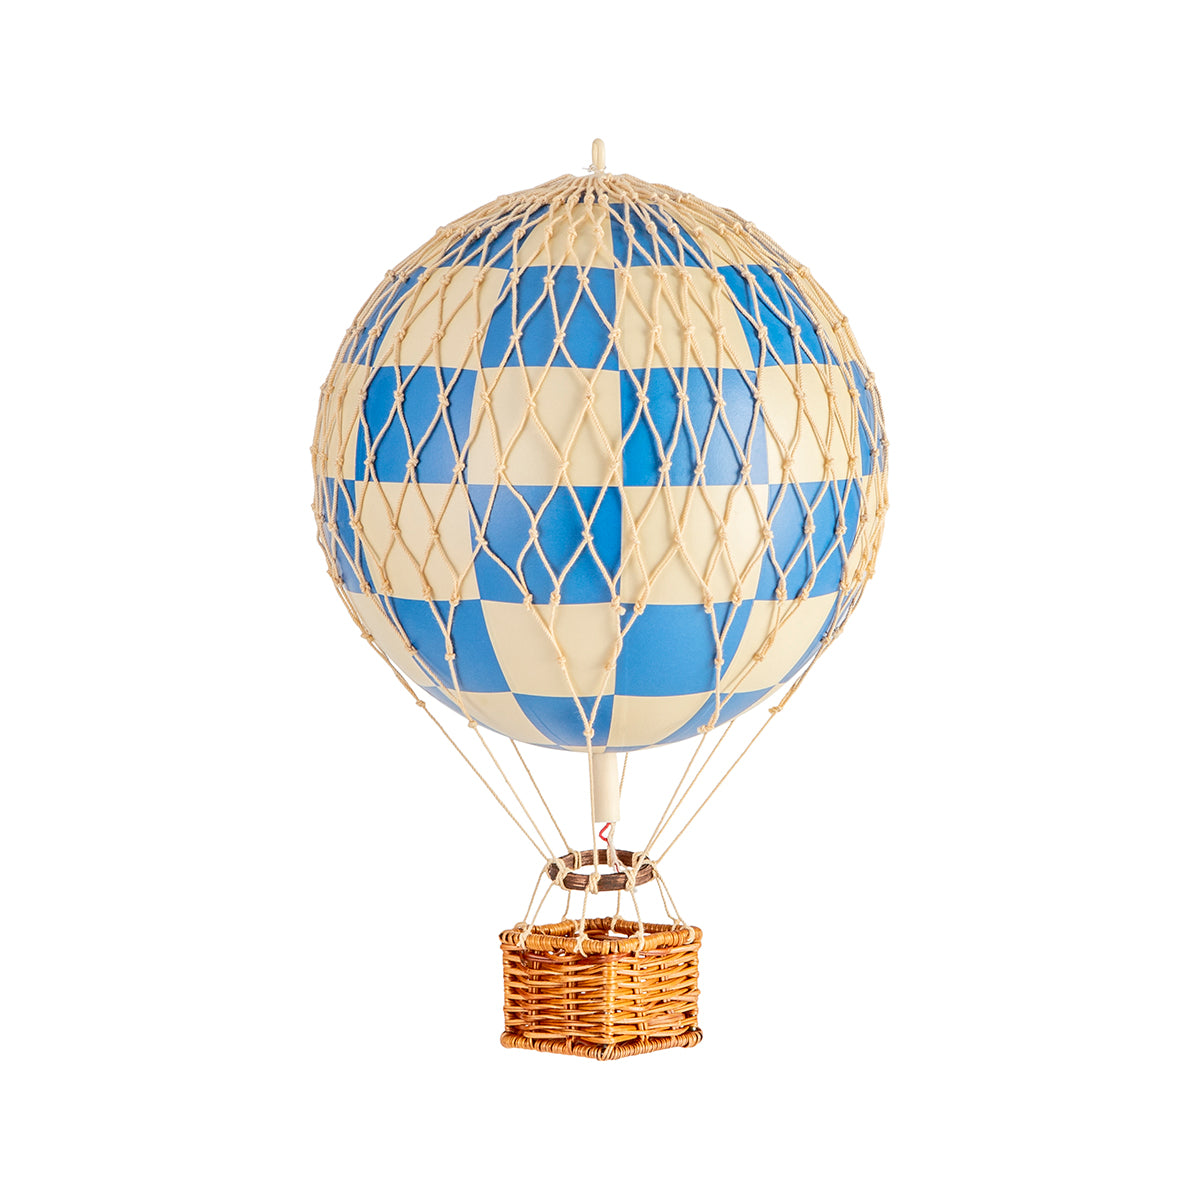 A Wonderen Small Hot Air Balloon - Travels Light on a white background.